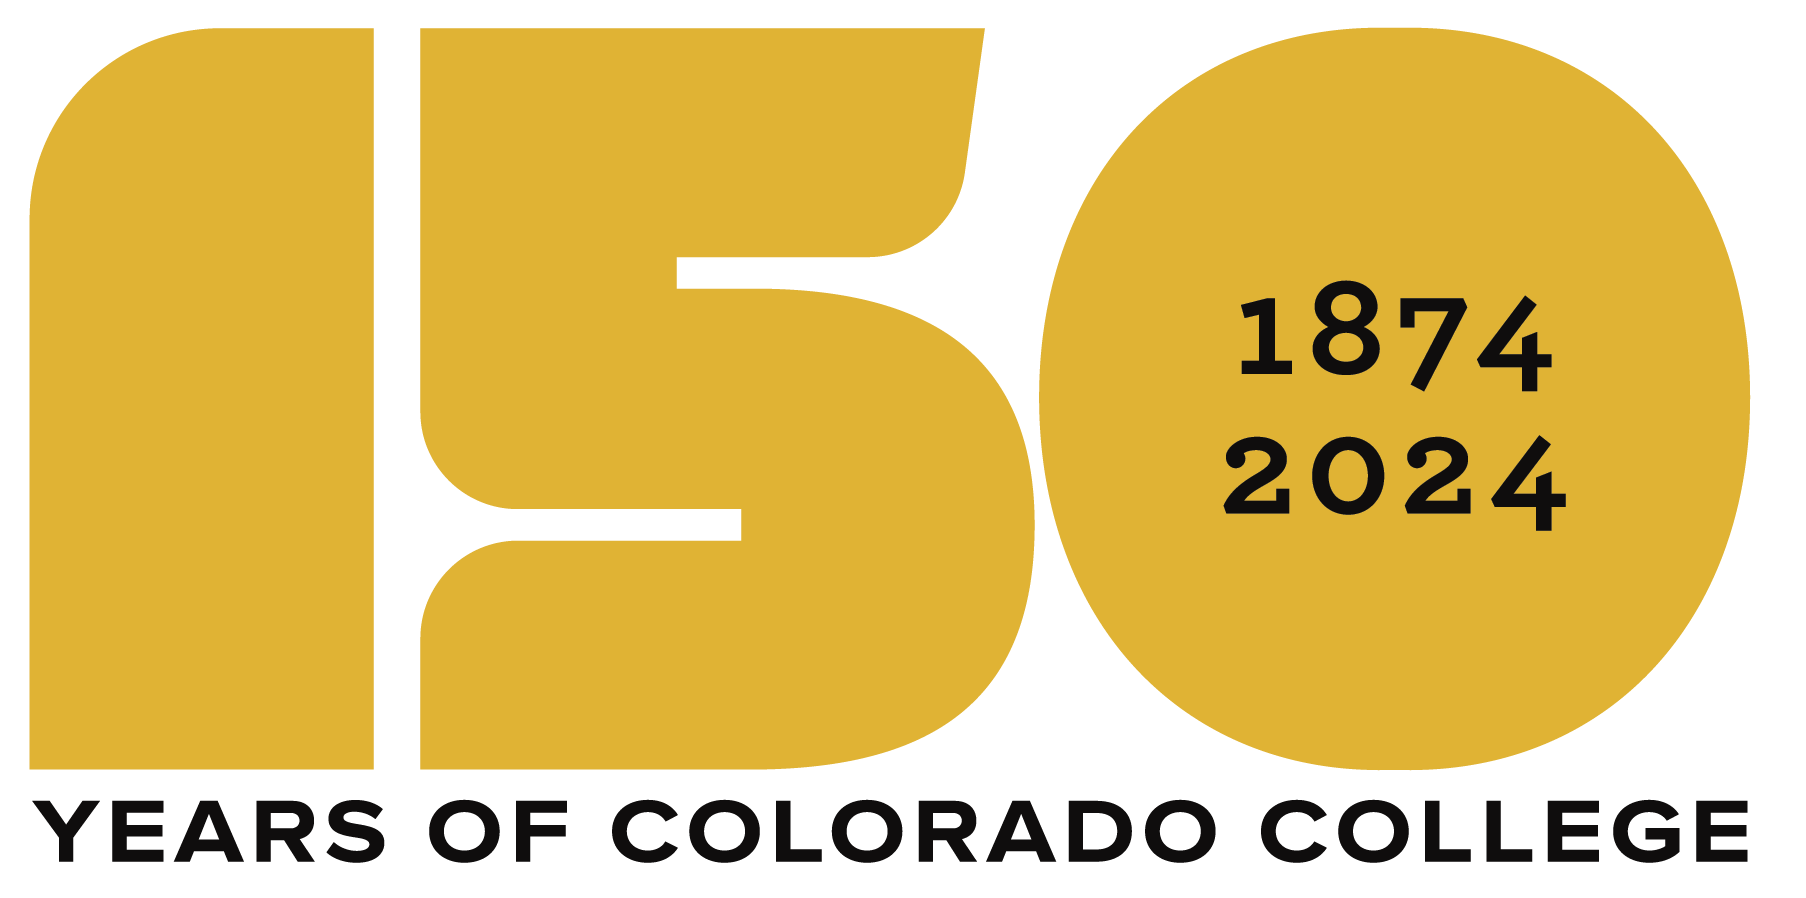 DESIGN_150Anniversary_Assets_Logo_YearsCelebratingColoColl_2Color_Years_TigerGold.png